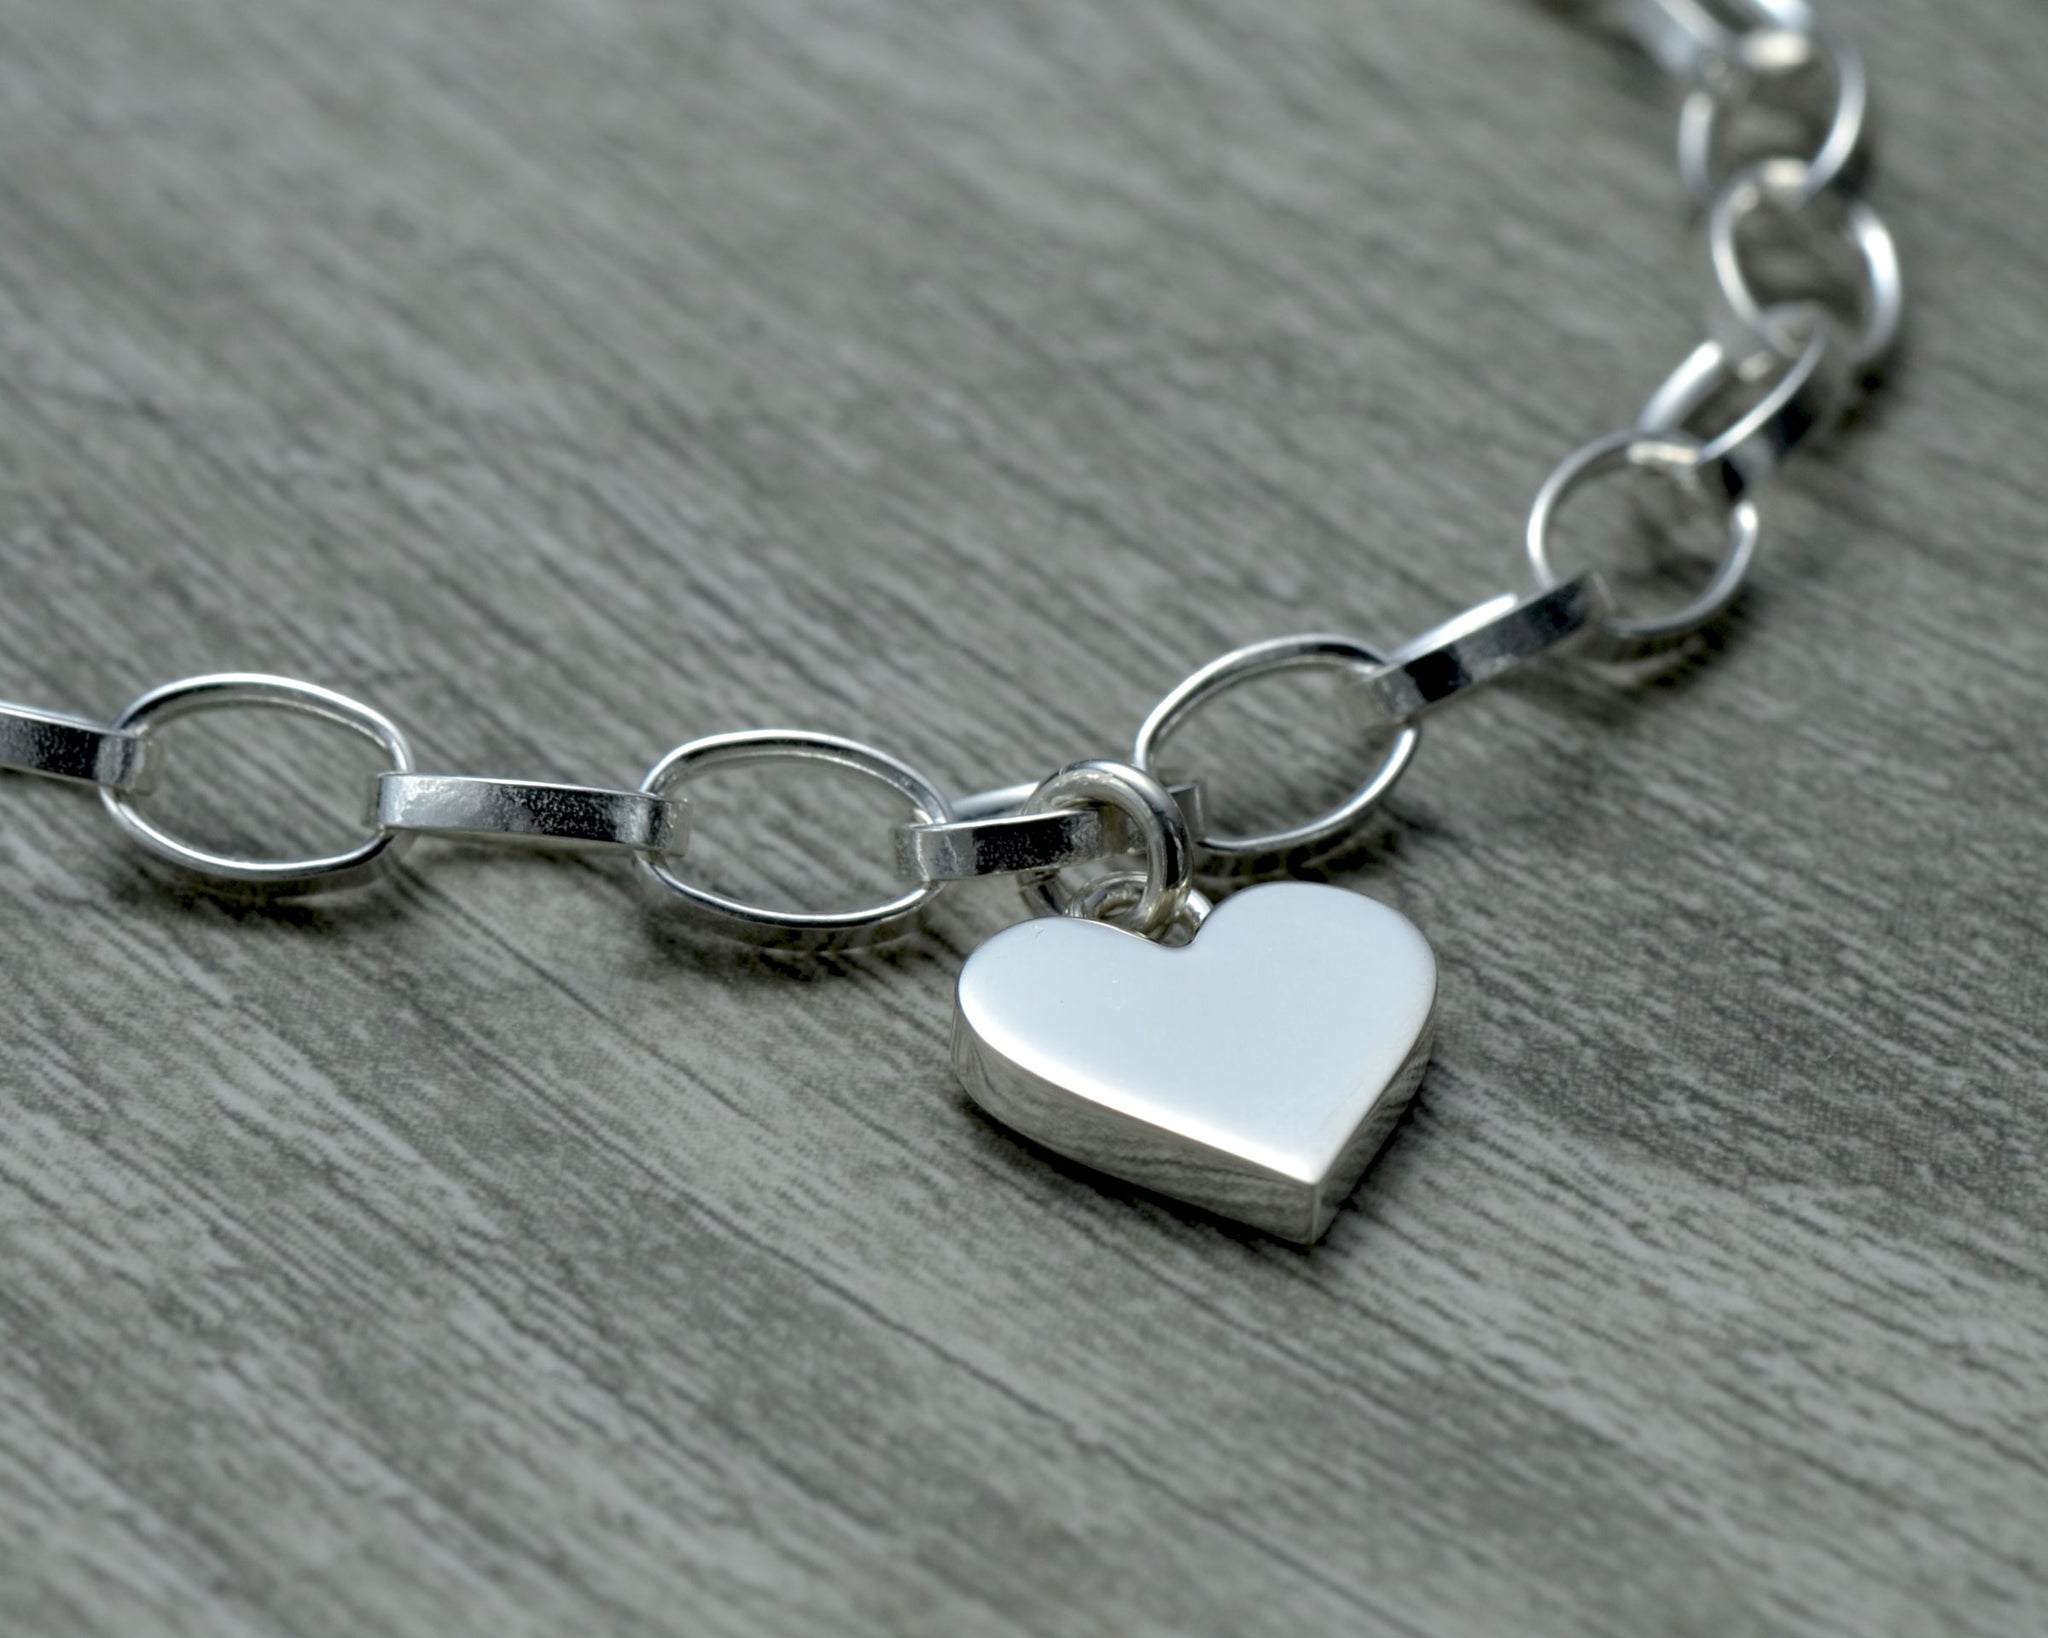 18ct Gold Plated Or Sterling Silver Heart Link Bracelet By Hurleyburley |  notonthehighstreet.com